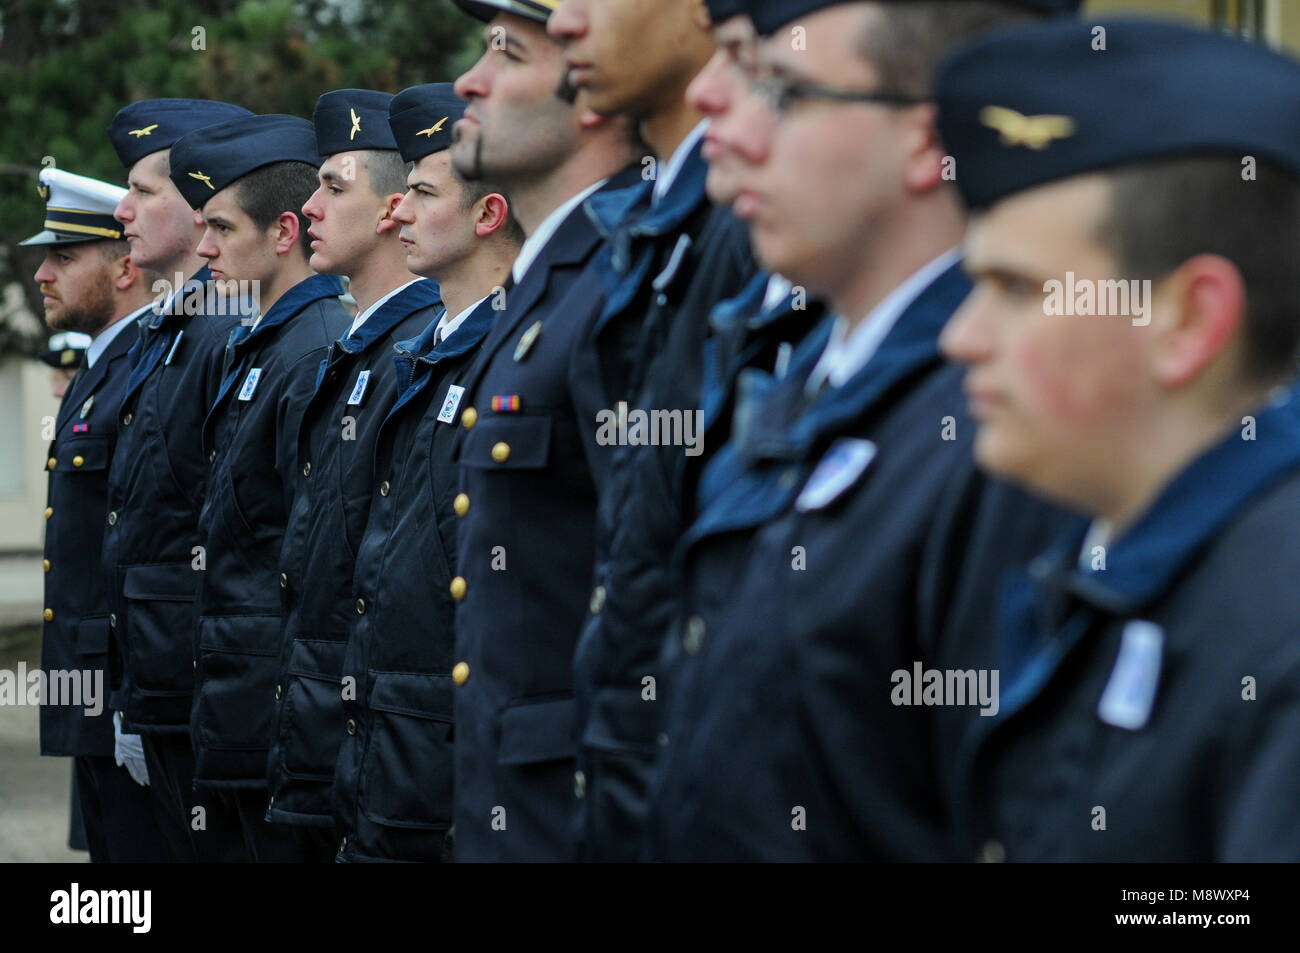 Amberieu-en-Bugey, France, 20th March 2018: Young volunteers for Military service (CSMV) are seen at Air Detachment 278 Base, in Amberieu-en-Bugey (Central-Eastern France), on March 20, 2018, as they receive military calot on the occasion of a symbolic ceremony paying homage to their engagement. The CSMV (Voluntary Military Service Center) of Amberieu-en-Bugey launched for the year 2018 a large campaign of recruitment. These young people, alienated from the workplace, will receive human,  behavioral and citizenship and training that will make them ready to integrate jobs in emplyment sectors l Stock Photo